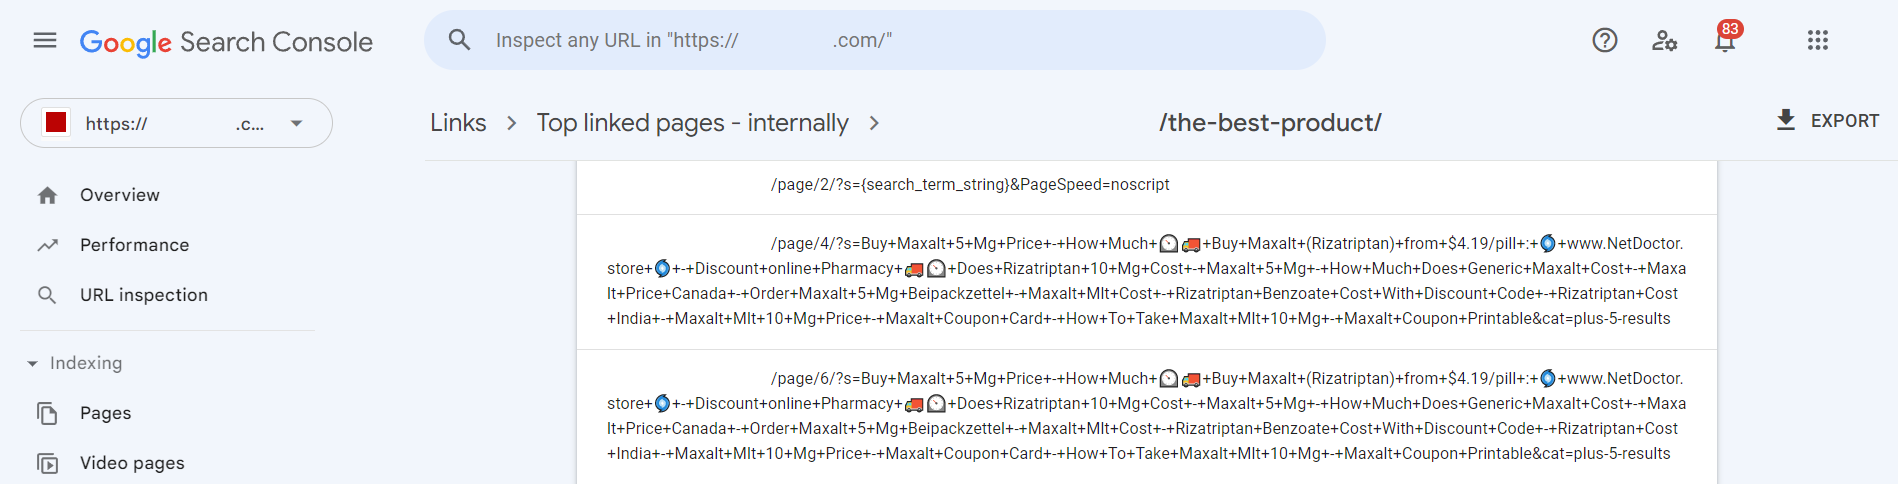 Image of Backlinks in Google Search Console of SEO Rank Poisioning via injected search queries in WordPress